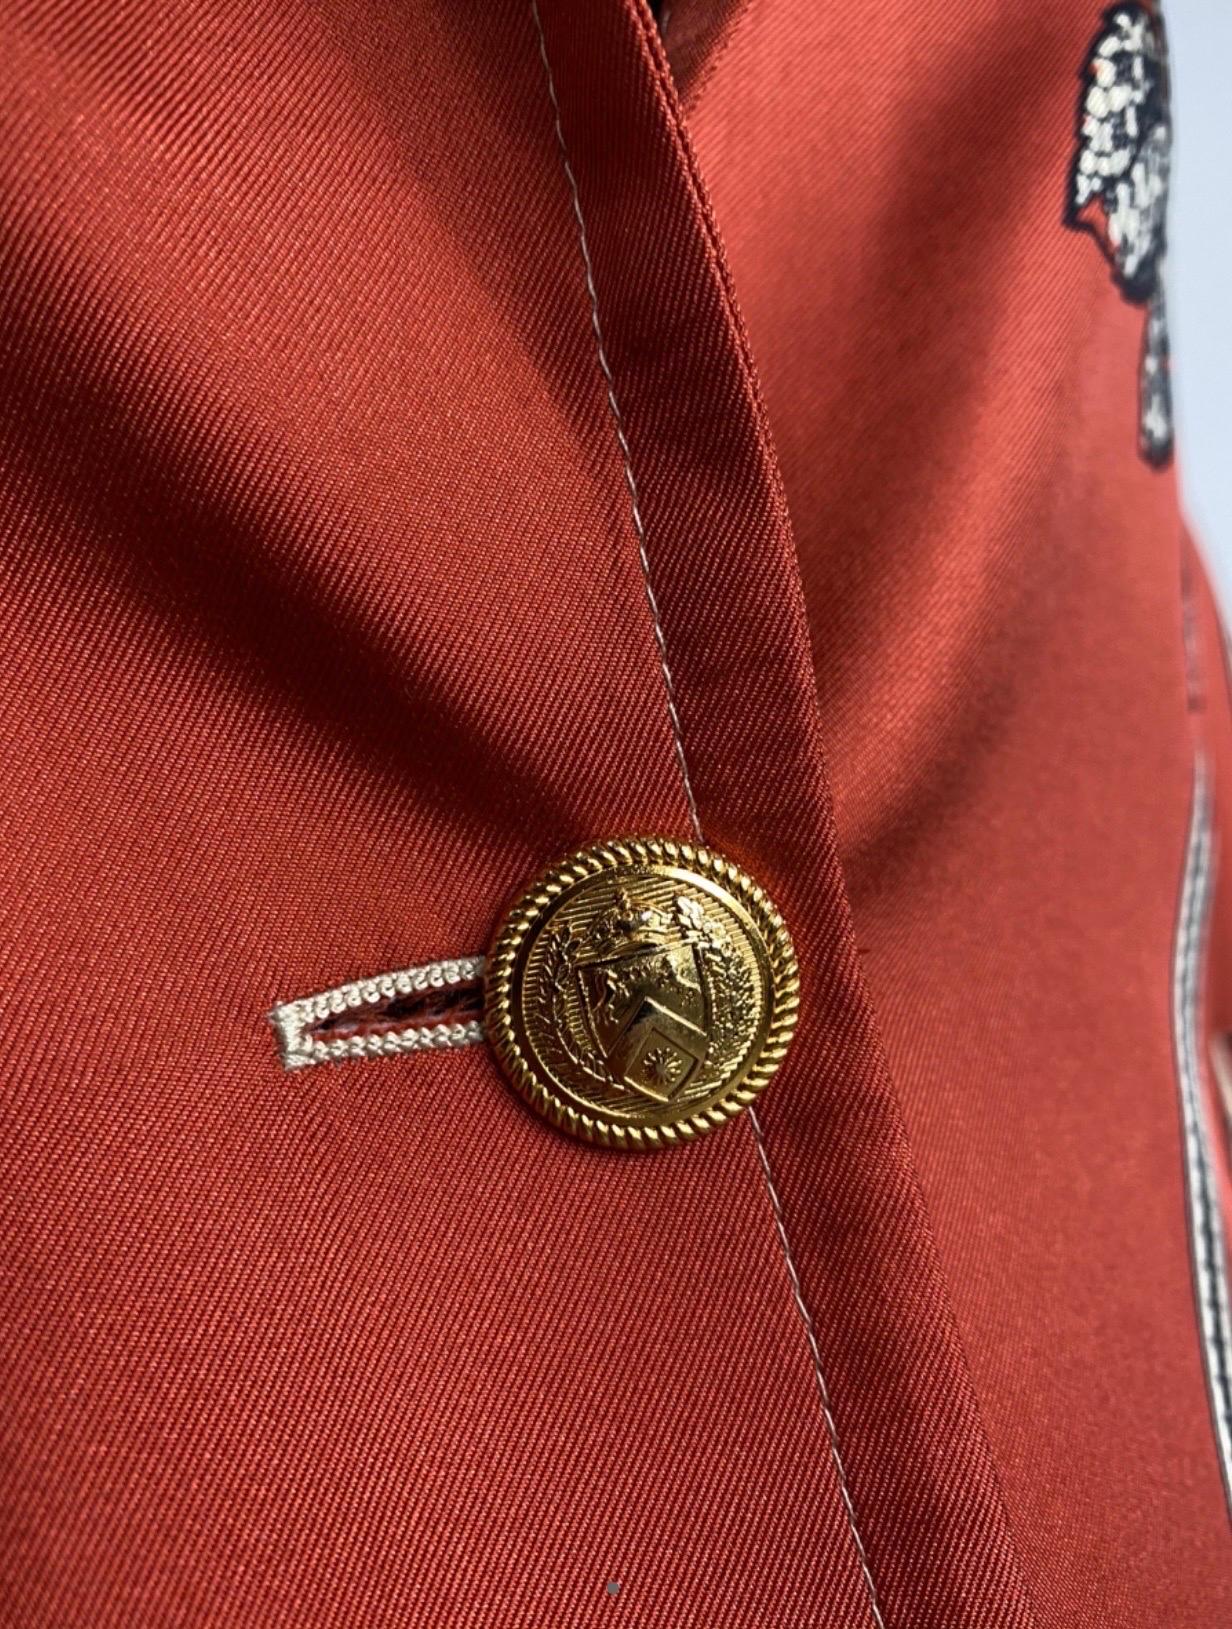 Women's or Men's Gucci red roses Jacket